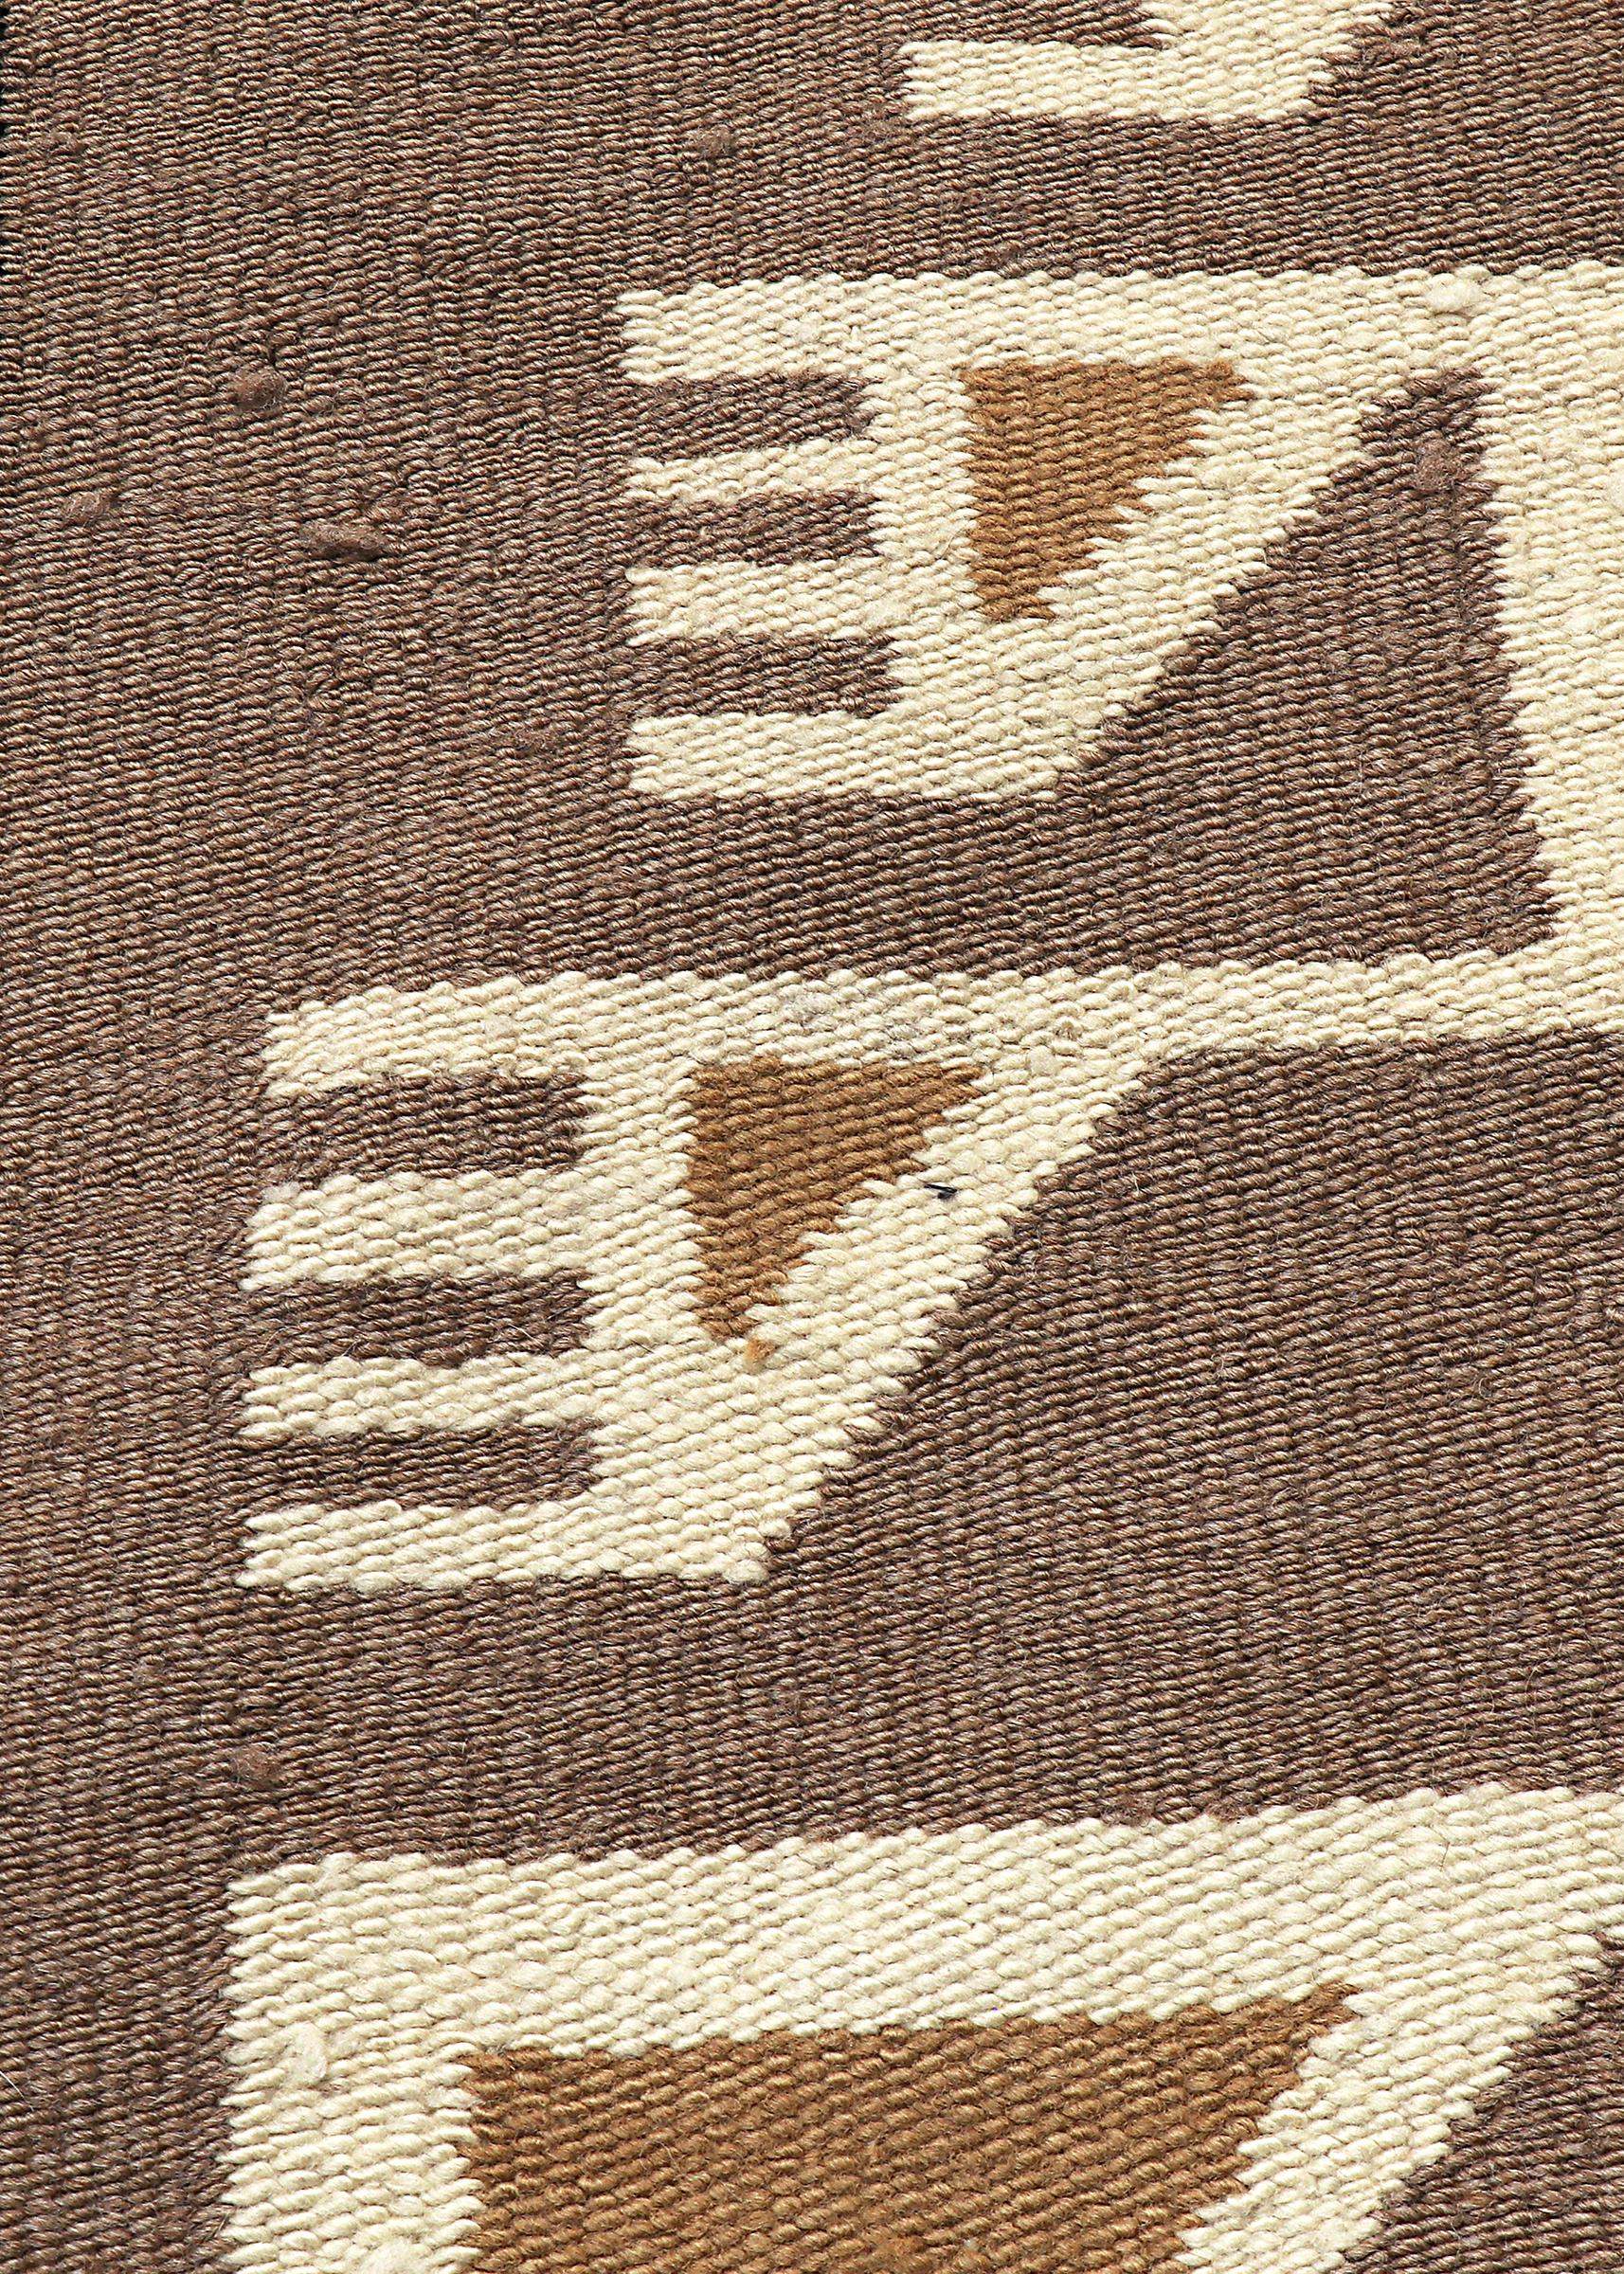 Navajo Two Gray Hills Area Rug, Trading Post Textile, Gray Ivory, Black, Brown In Good Condition For Sale In Denver, CO